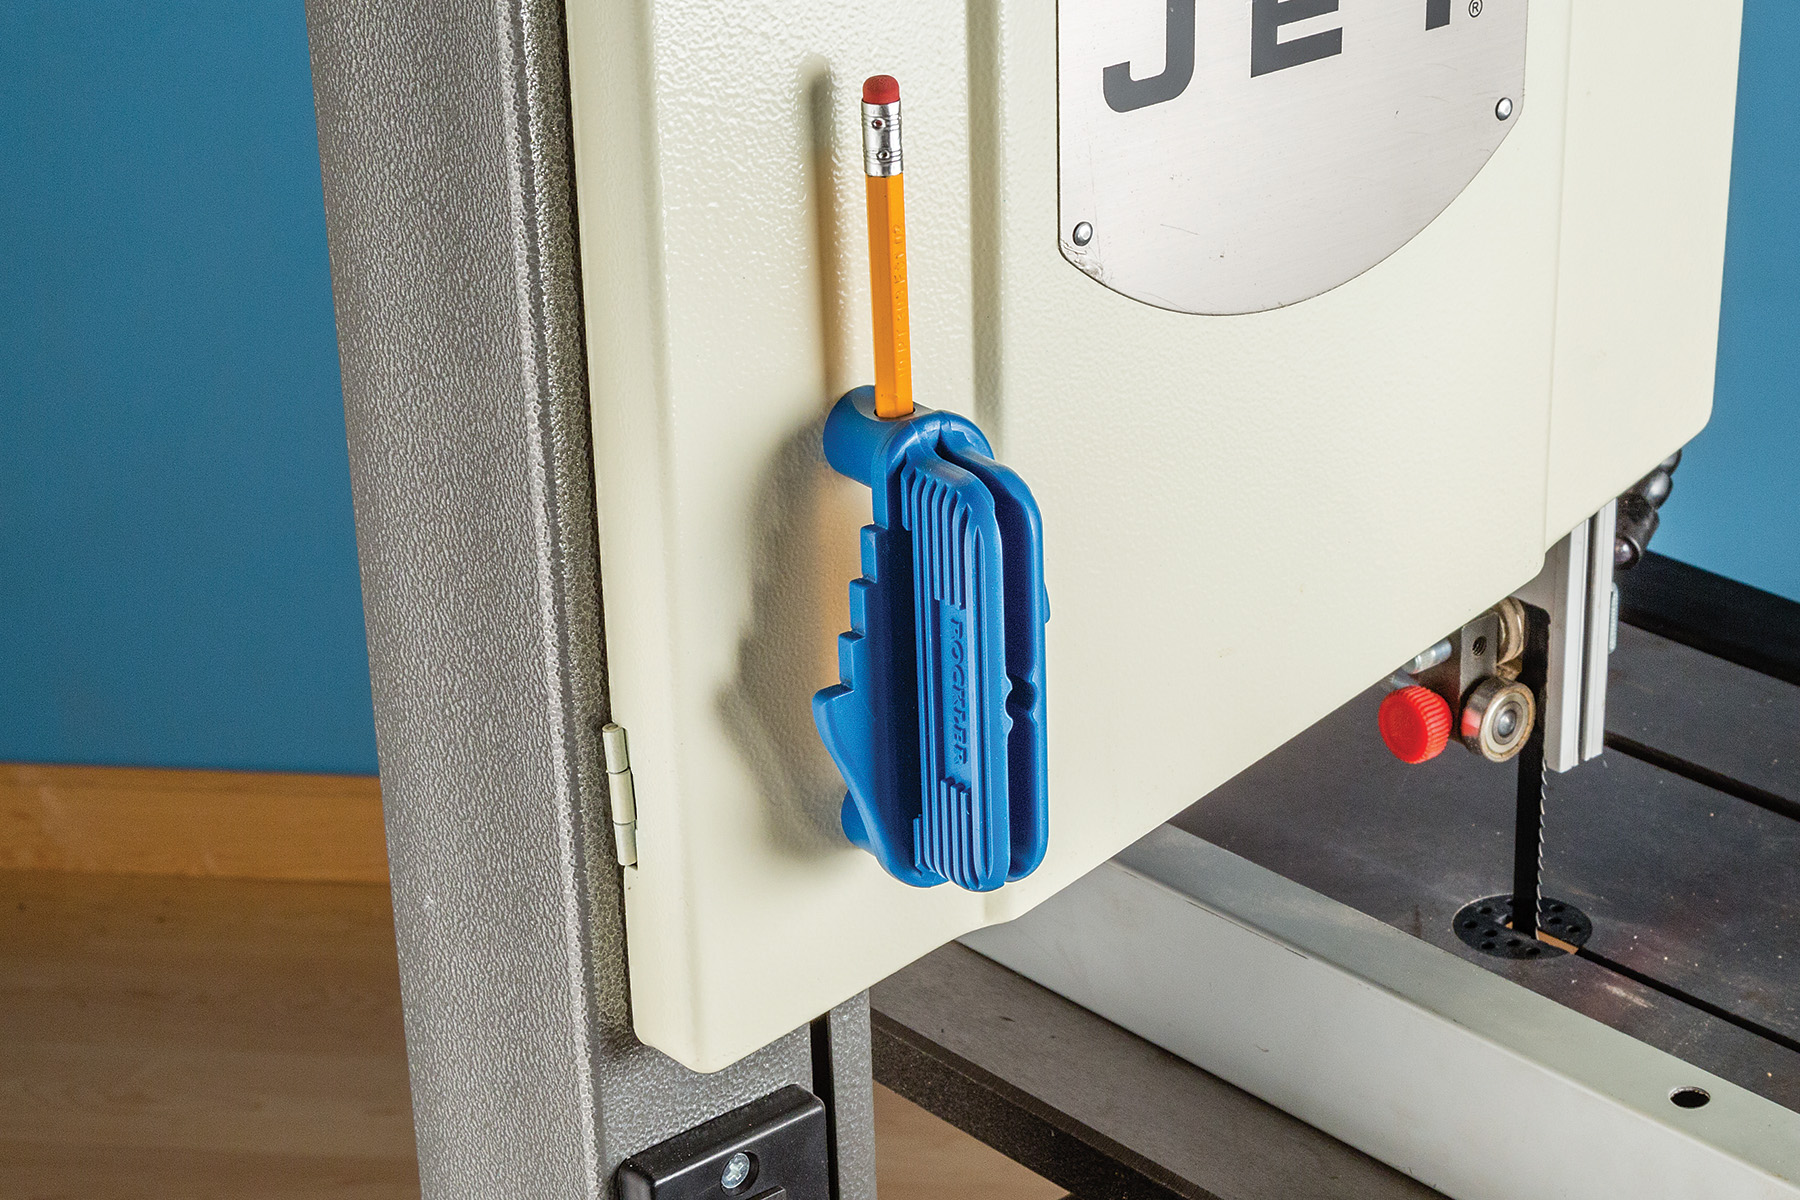 The Center/Offset Marking Tool houses a magnet in one of its posts for convenient storage on shop machines.